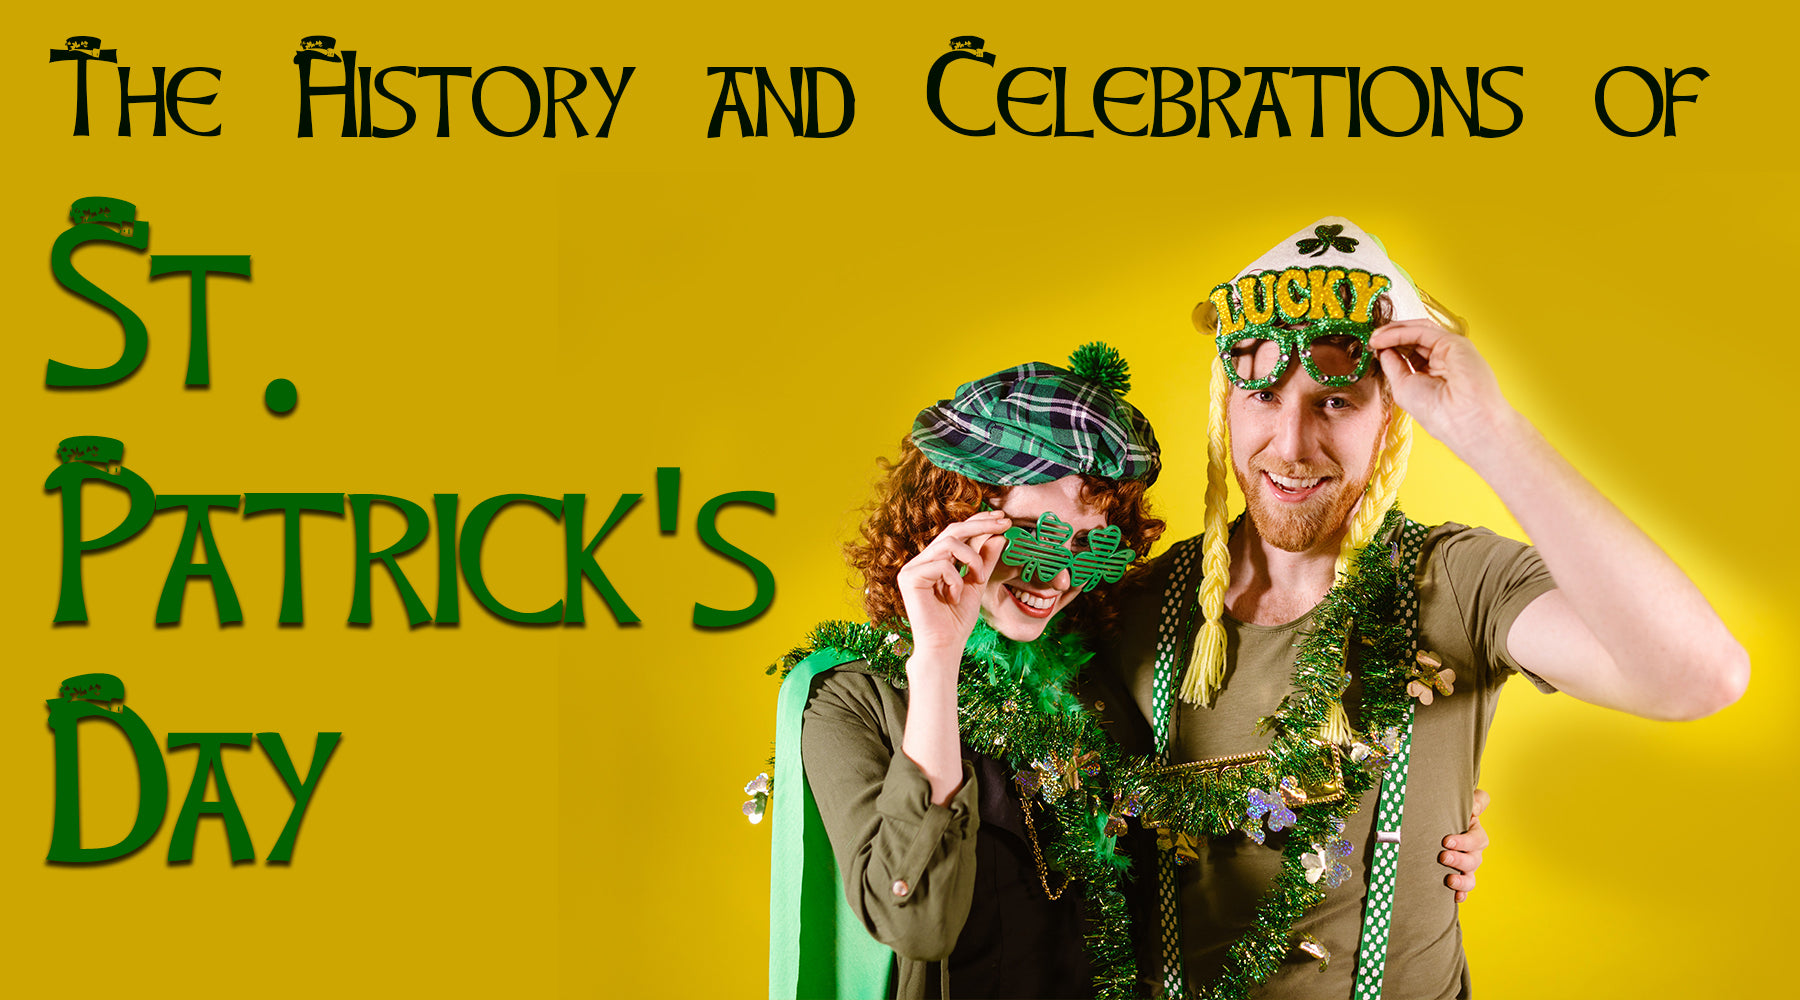 The History and Celebrations of St. Patrick’s Day